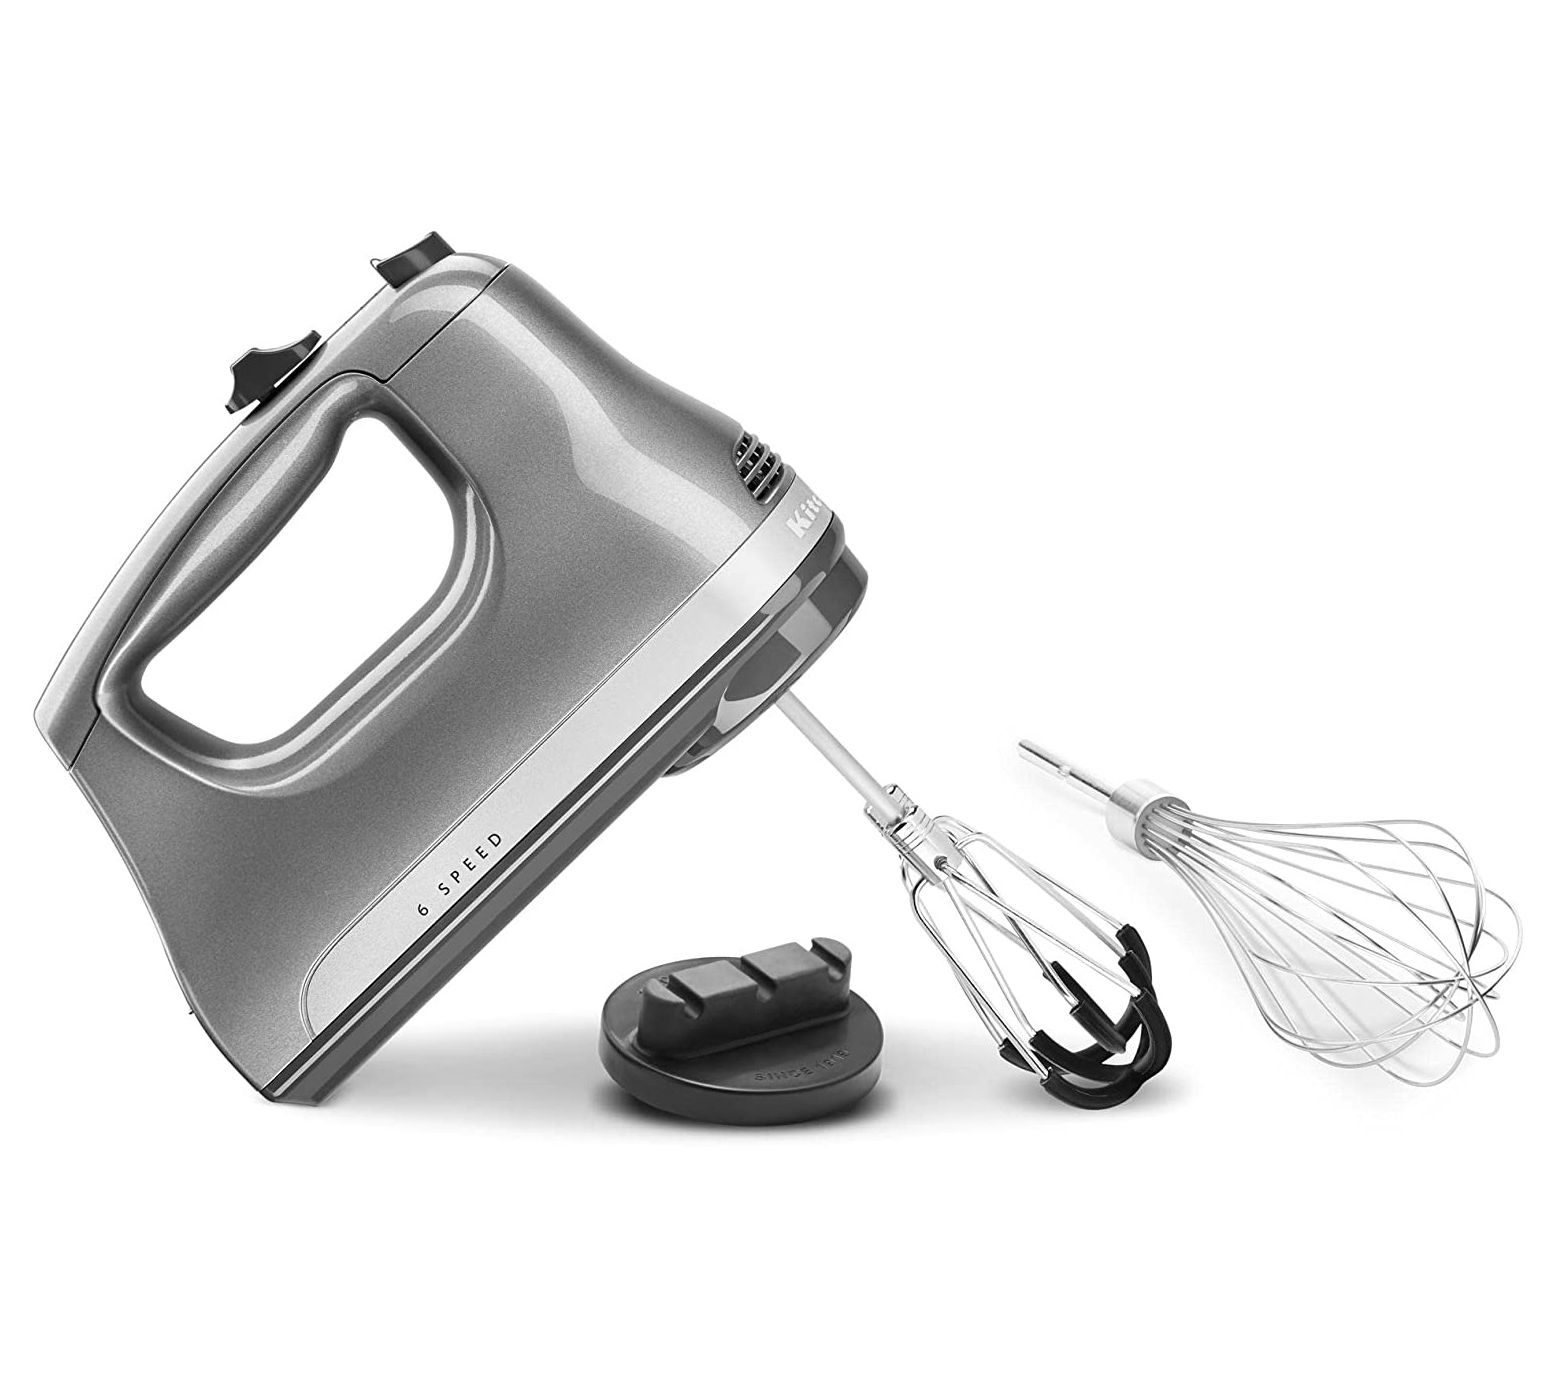 KitchenAid Silver 9-Speed Electric Hand Mixer + Reviews